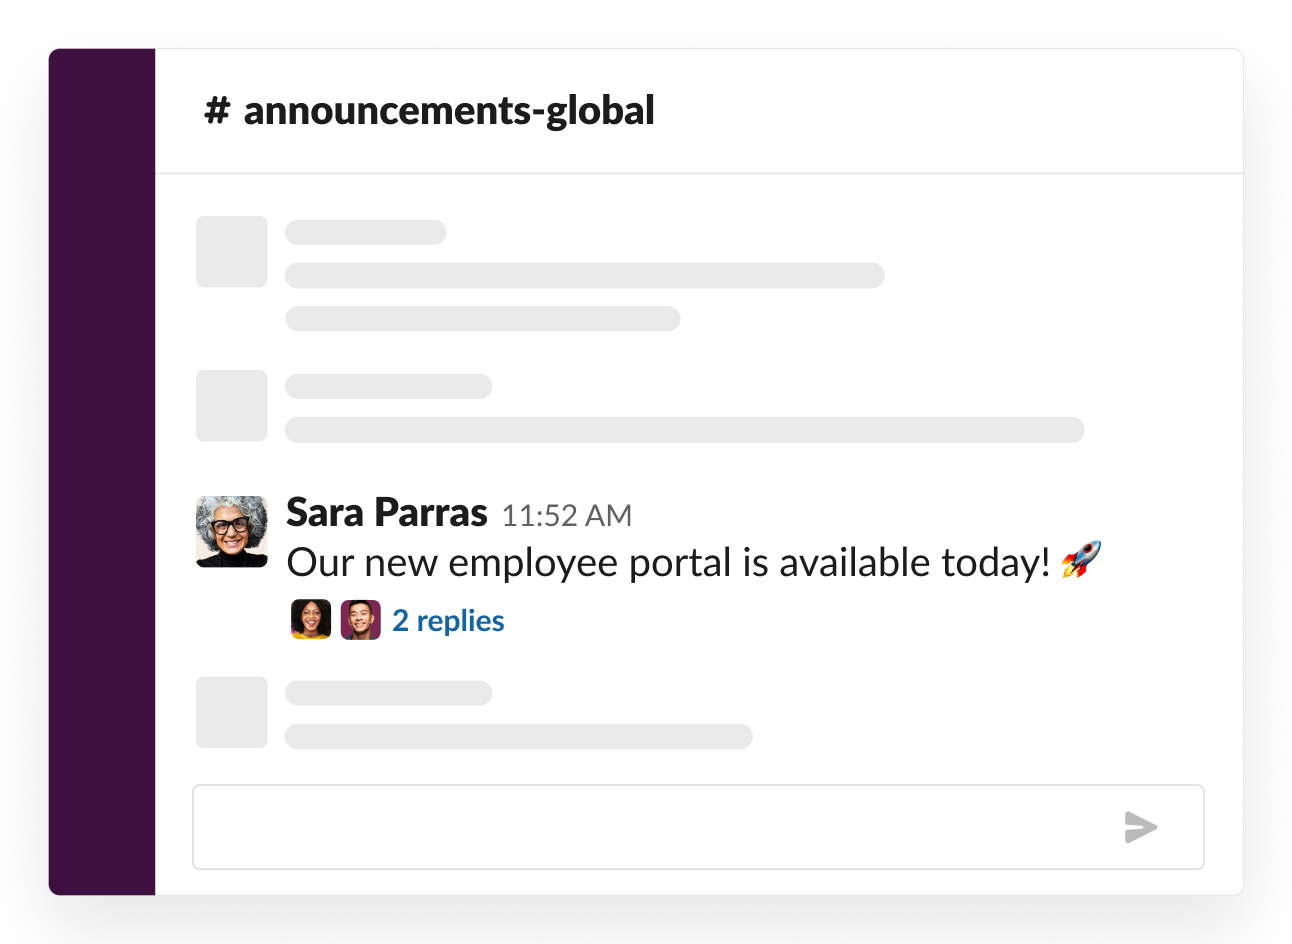 Example of an announcements channel with a message sharing information about the launch of an employee portal